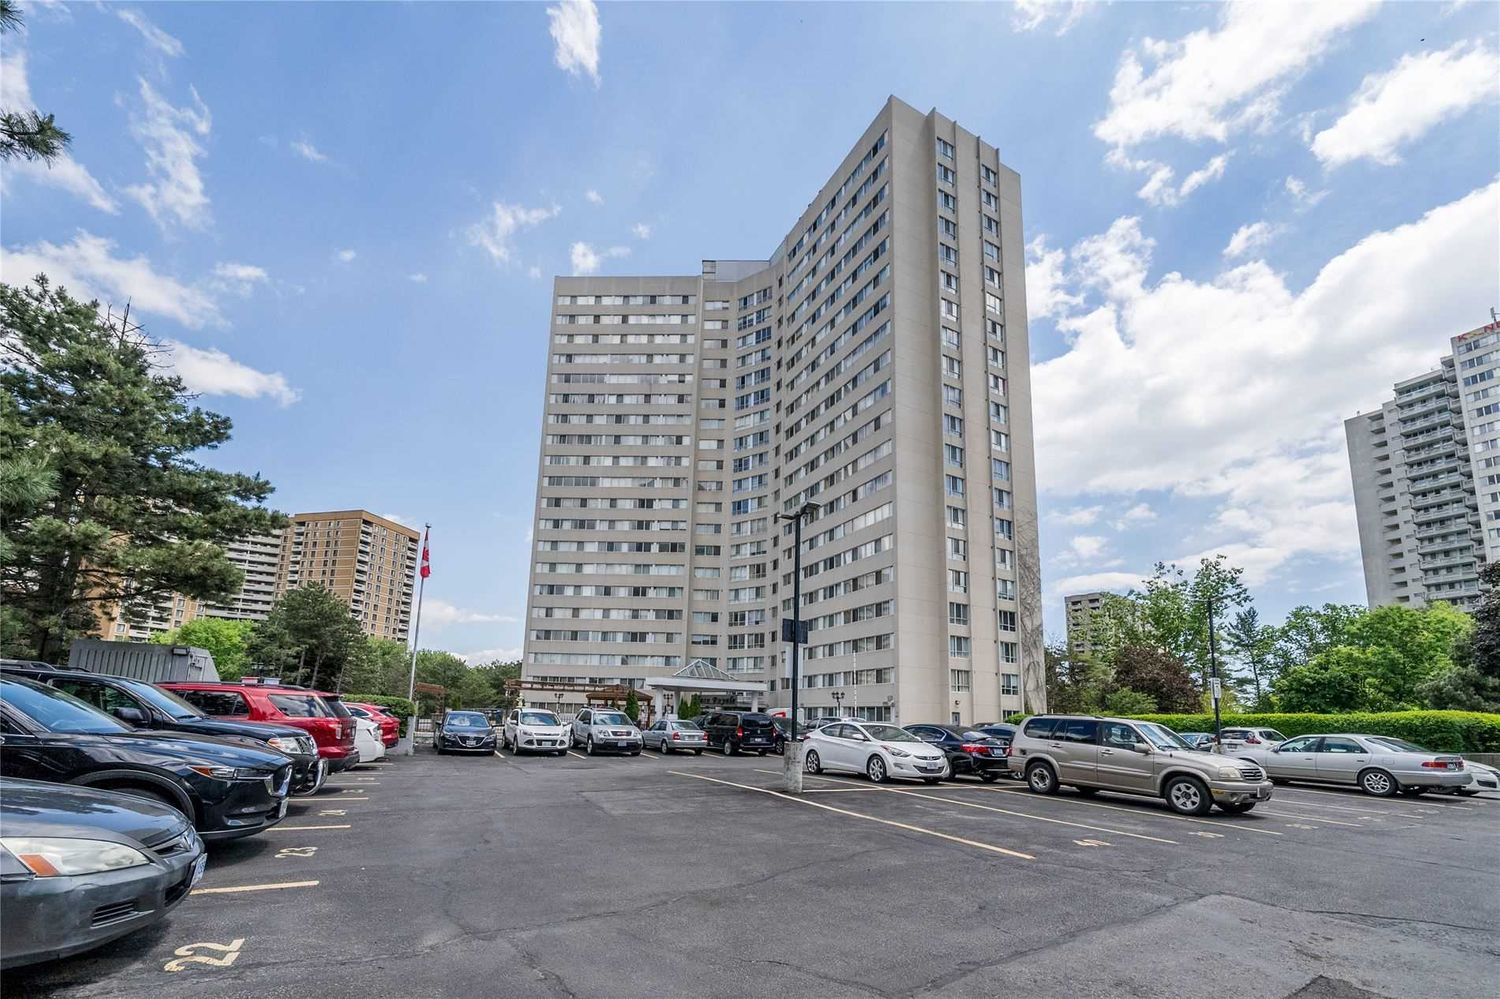 3695 Kaneff Crescent. Place Royale Condo is located in  Mississauga, Toronto - image #1 of 3